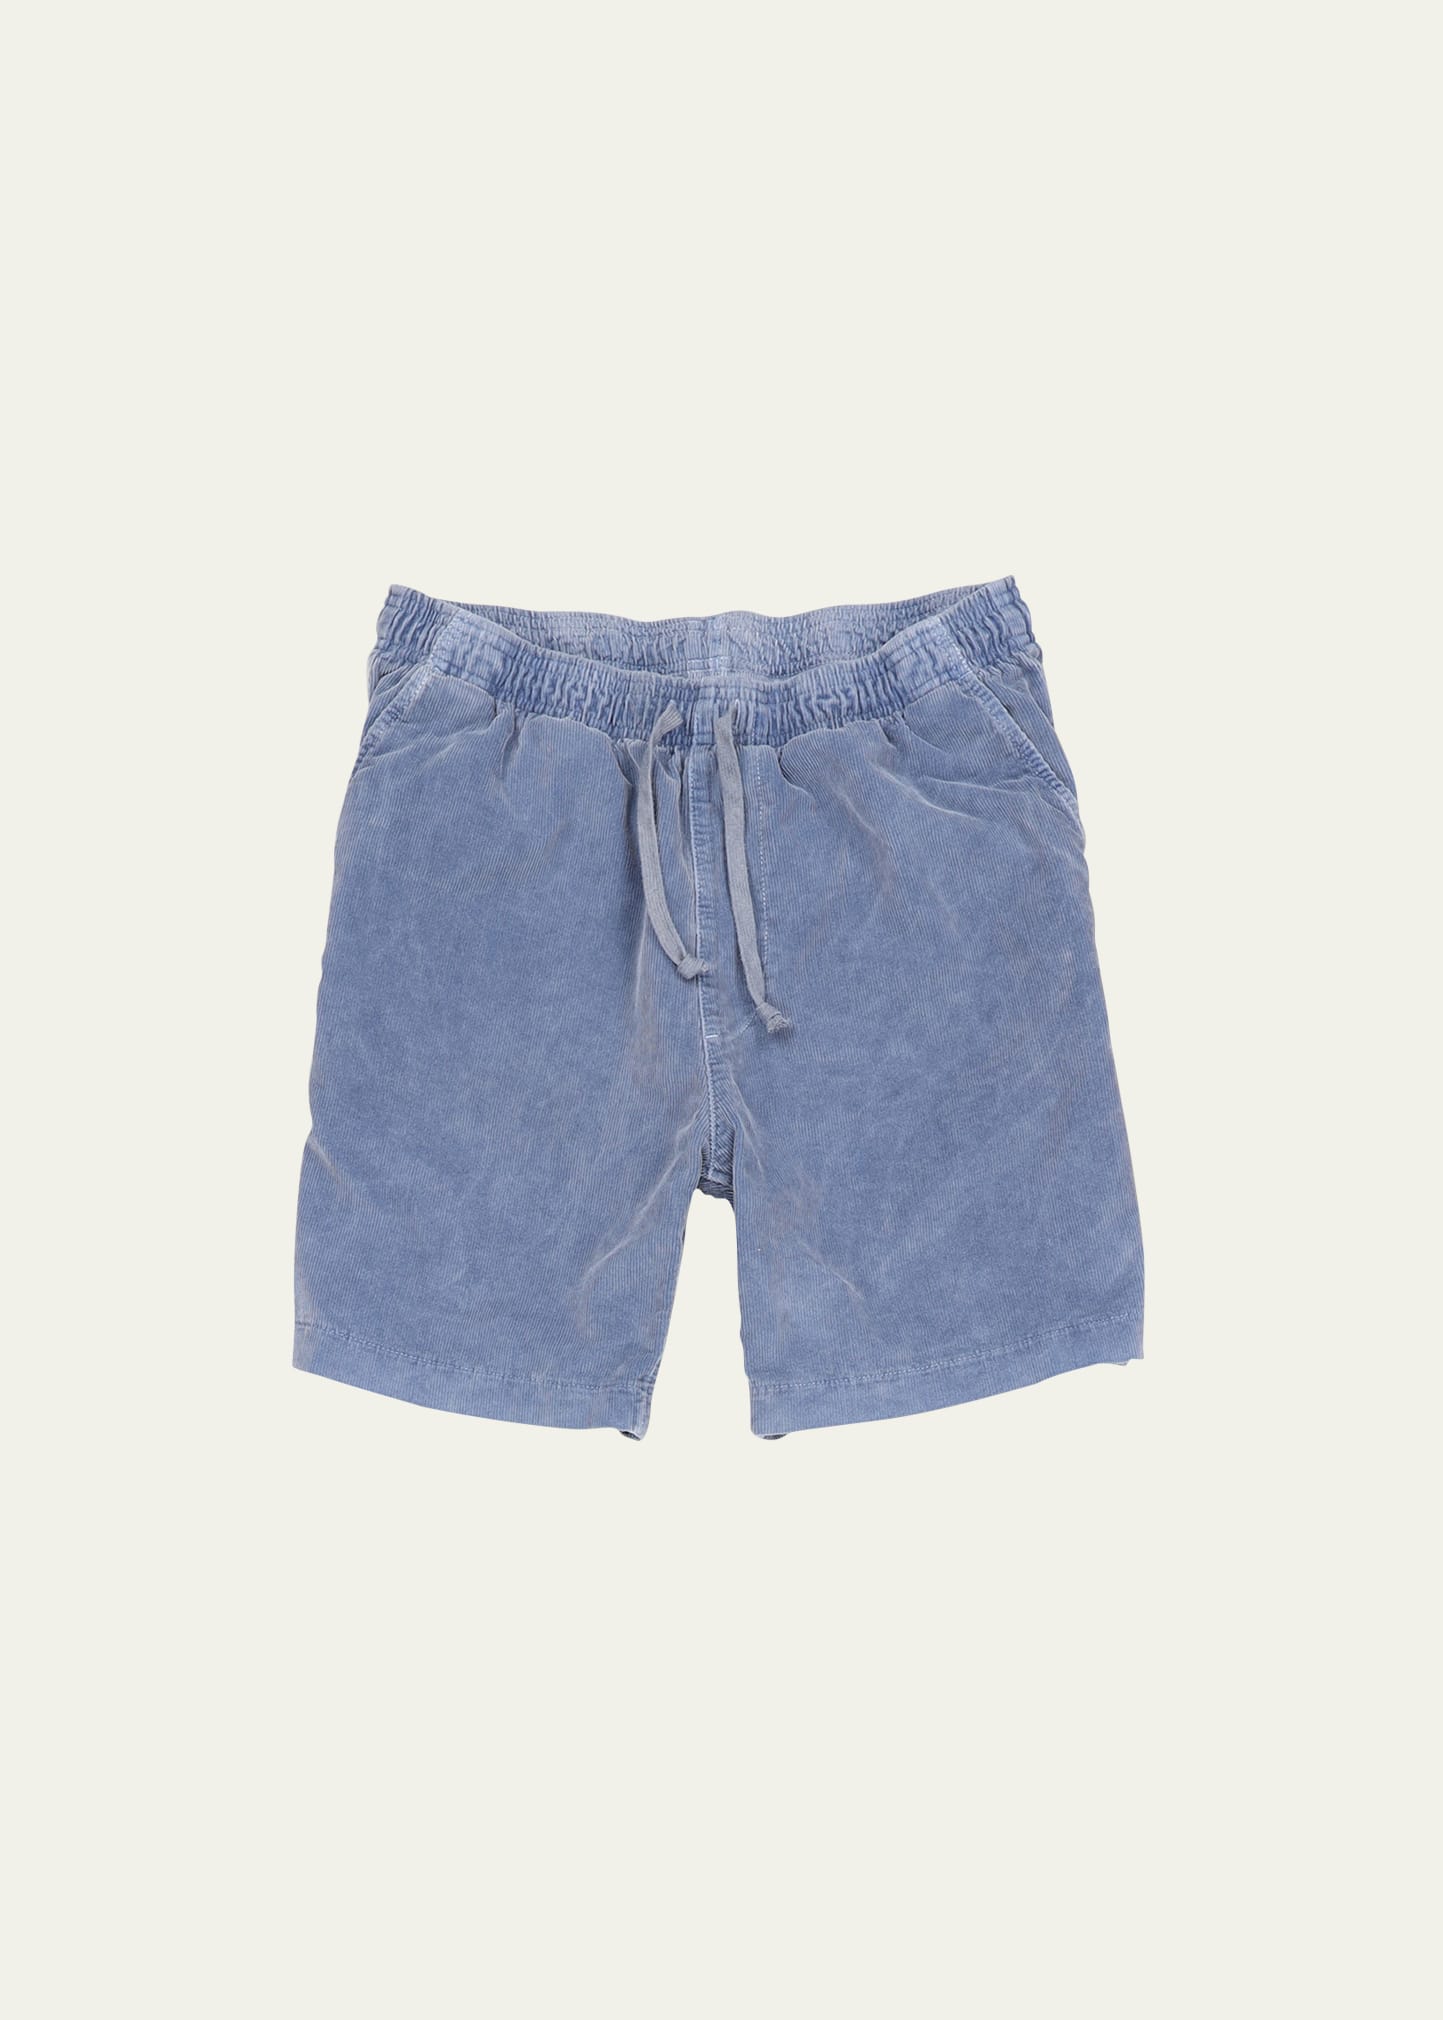 Save Khaki Men's Pigment-dyed Corduroy Shorts In Air Force